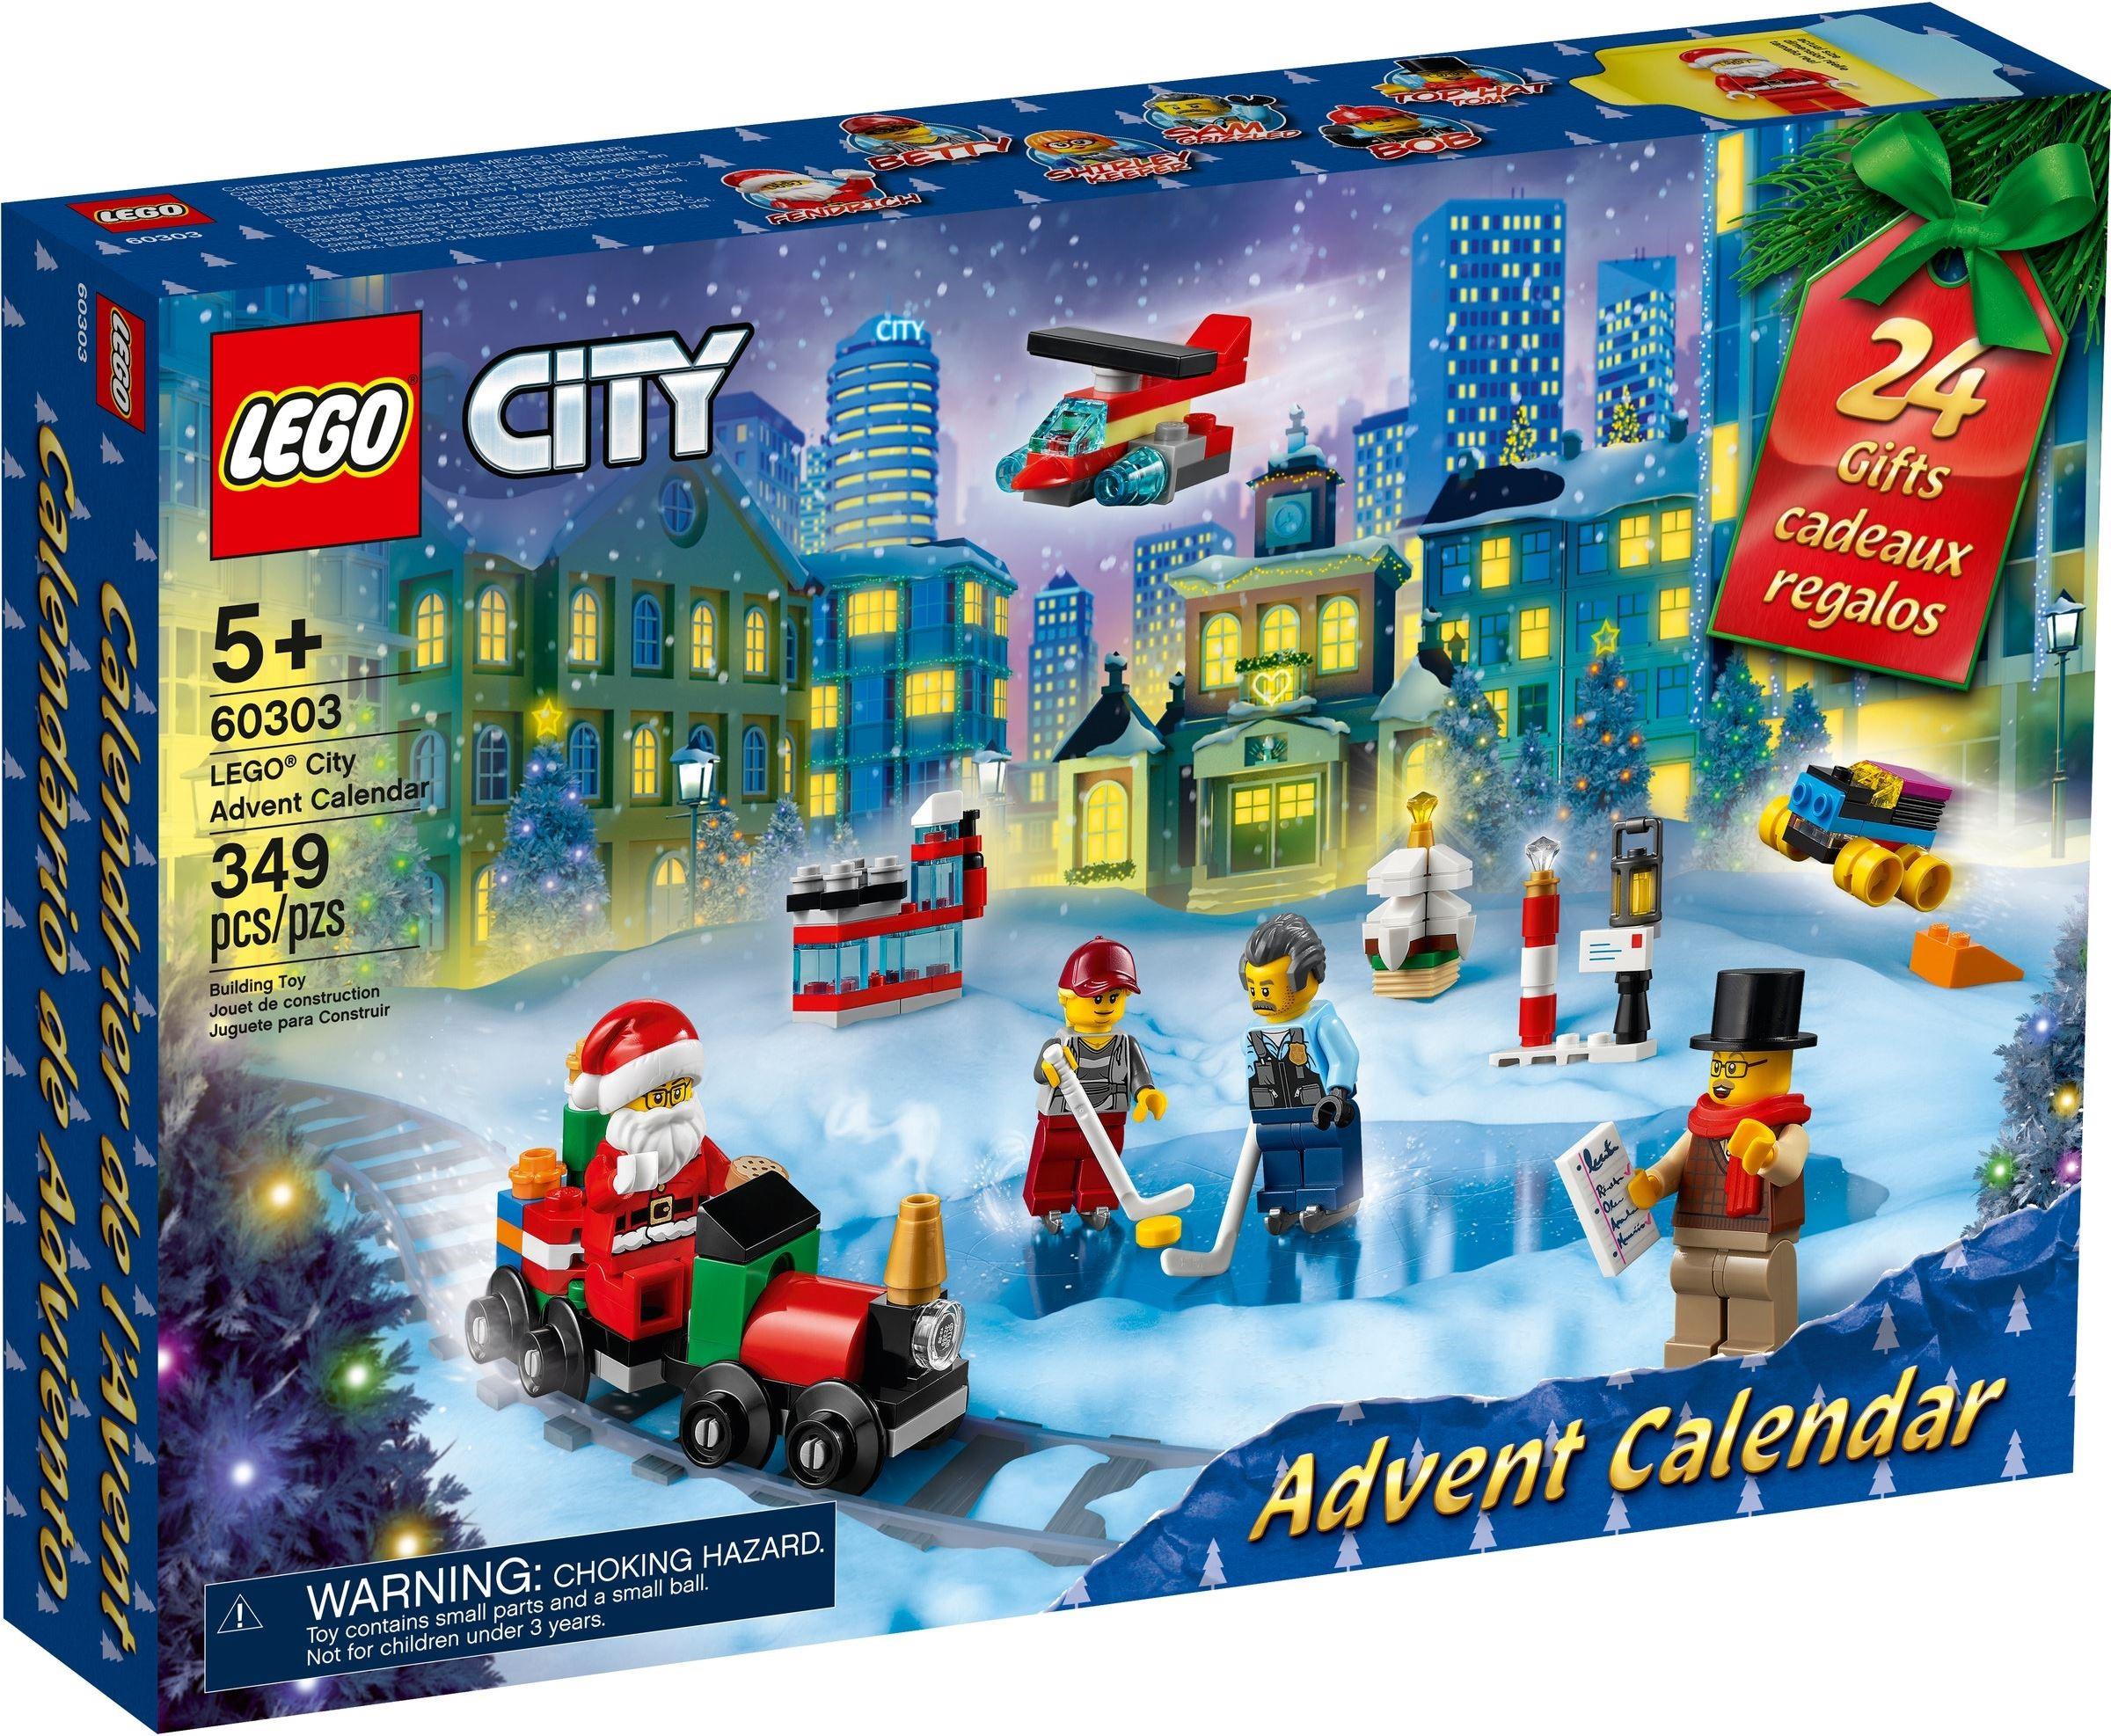 24 Christmas Counting Down Gifts Lego City Advent Calendar 2020 Ages 5+ 